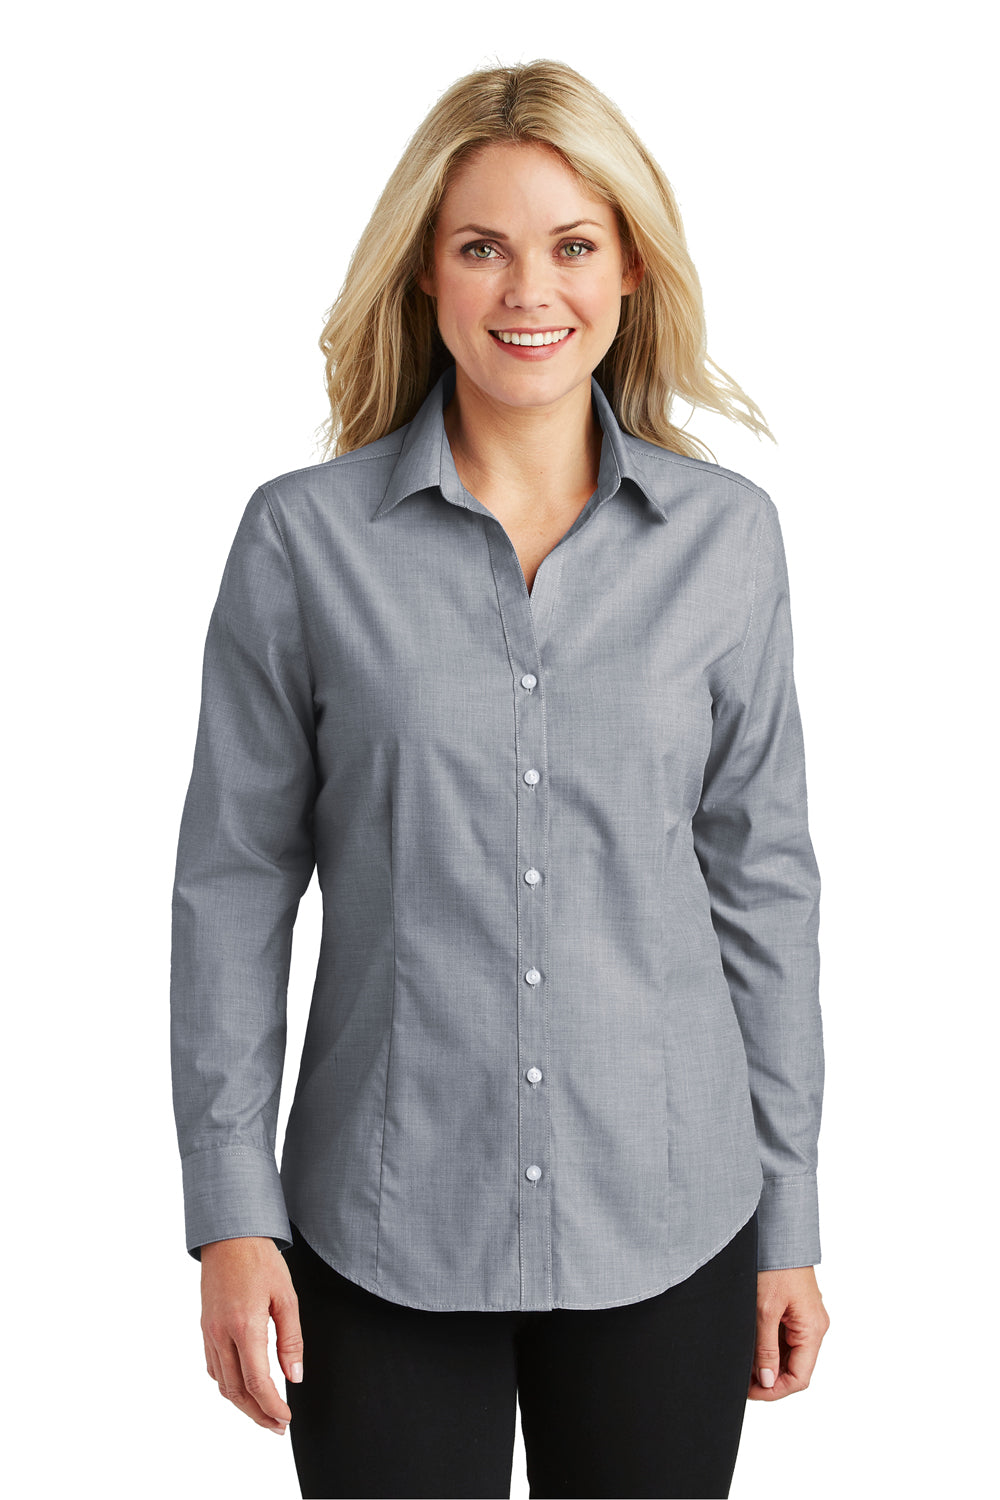 Port Authority L640 Womens Easy Care Wrinkle Resistant Long Sleeve Button Down Shirt Navy Blue Frost Front